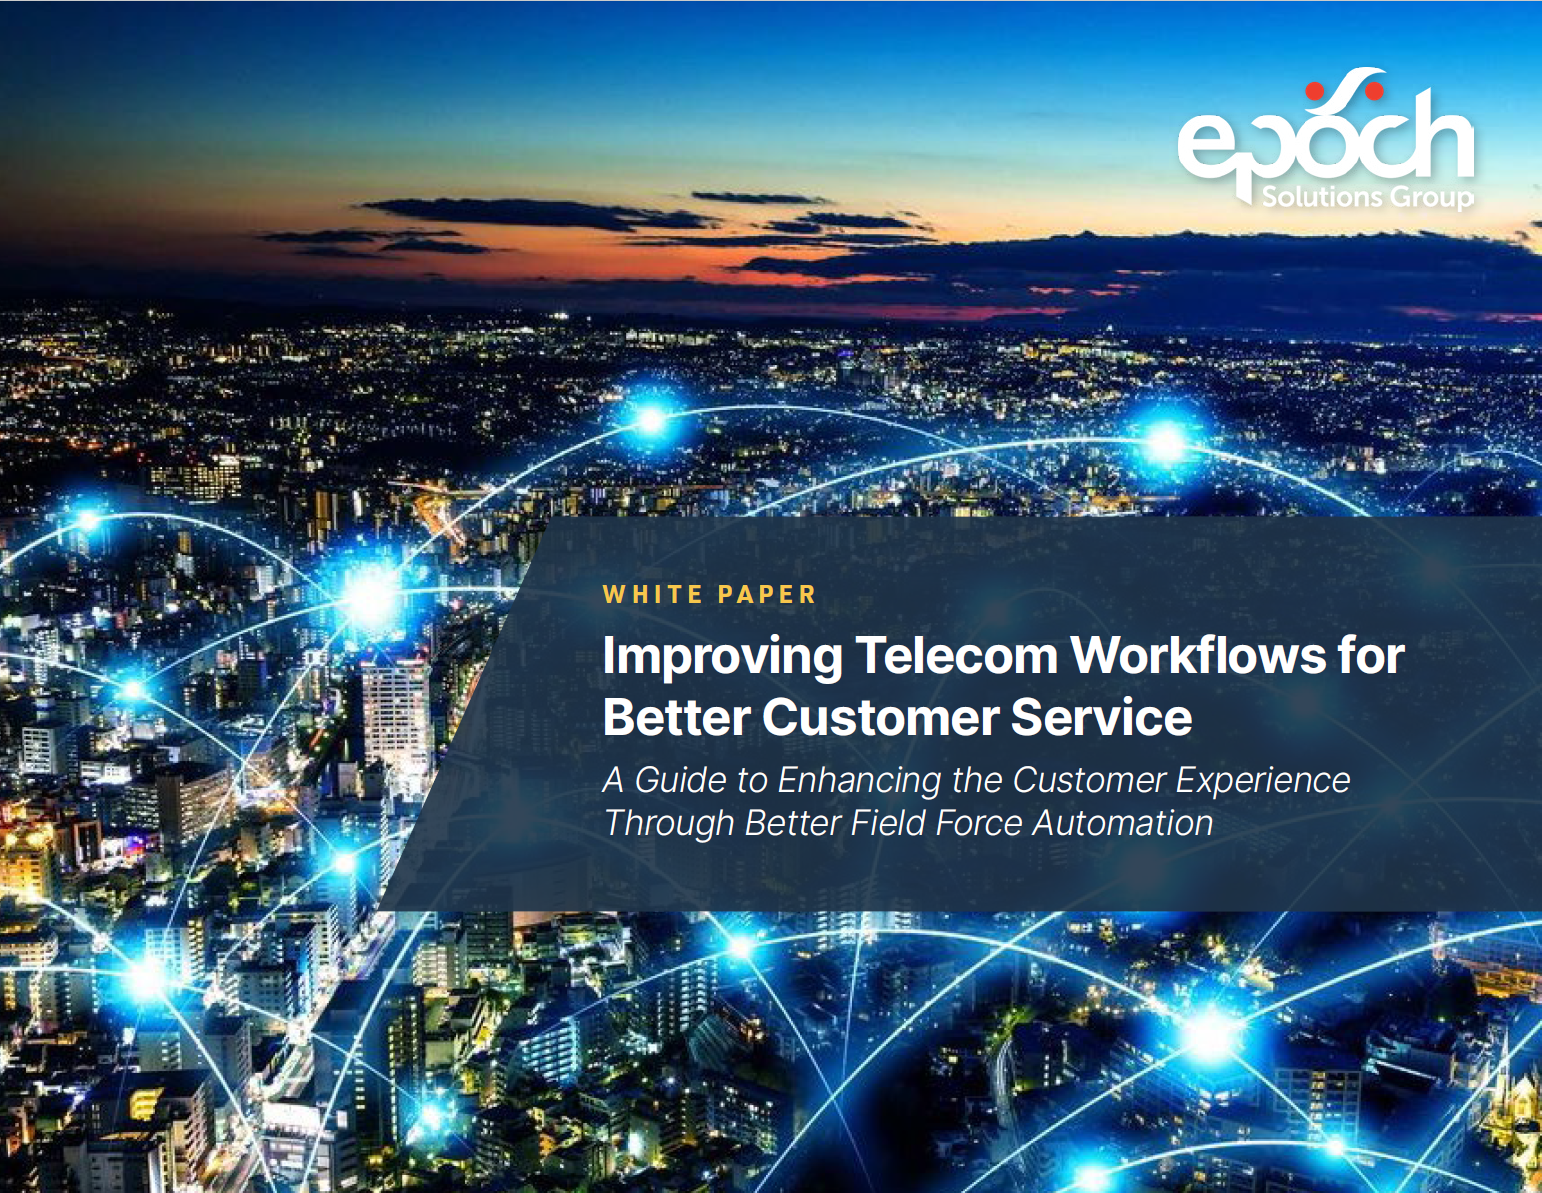 Improving Telecom Workflows for Better Customer Service: A Guide to Enhancing the Customer Experience Through Better Field Force Automation